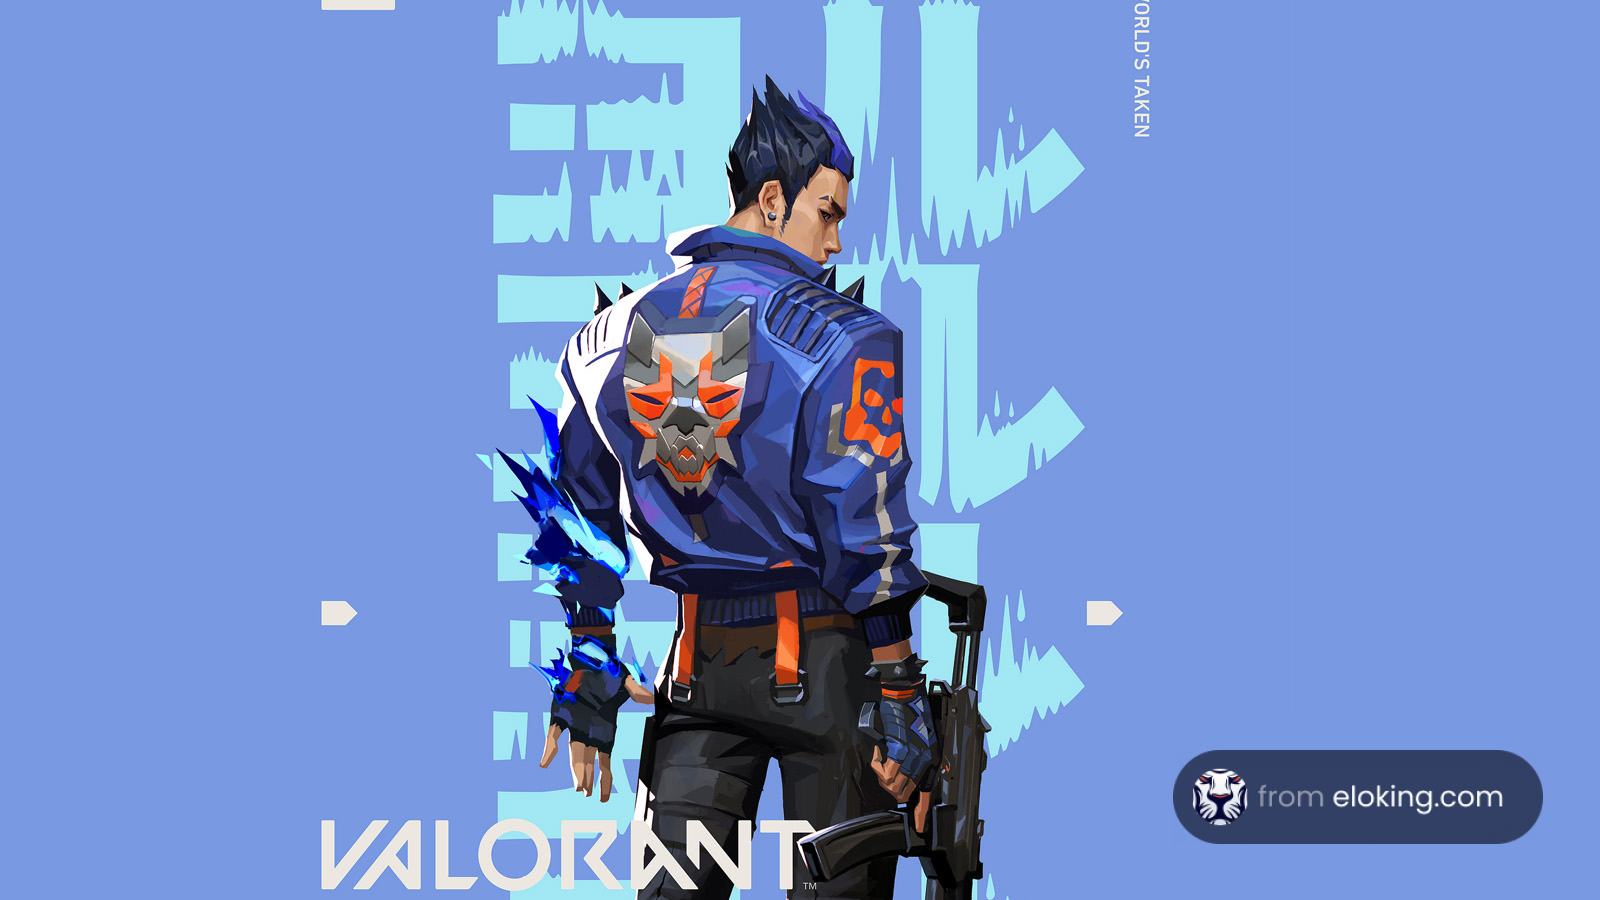 Artistic depiction of a Valorant game character in dynamic pose with futuristic elements